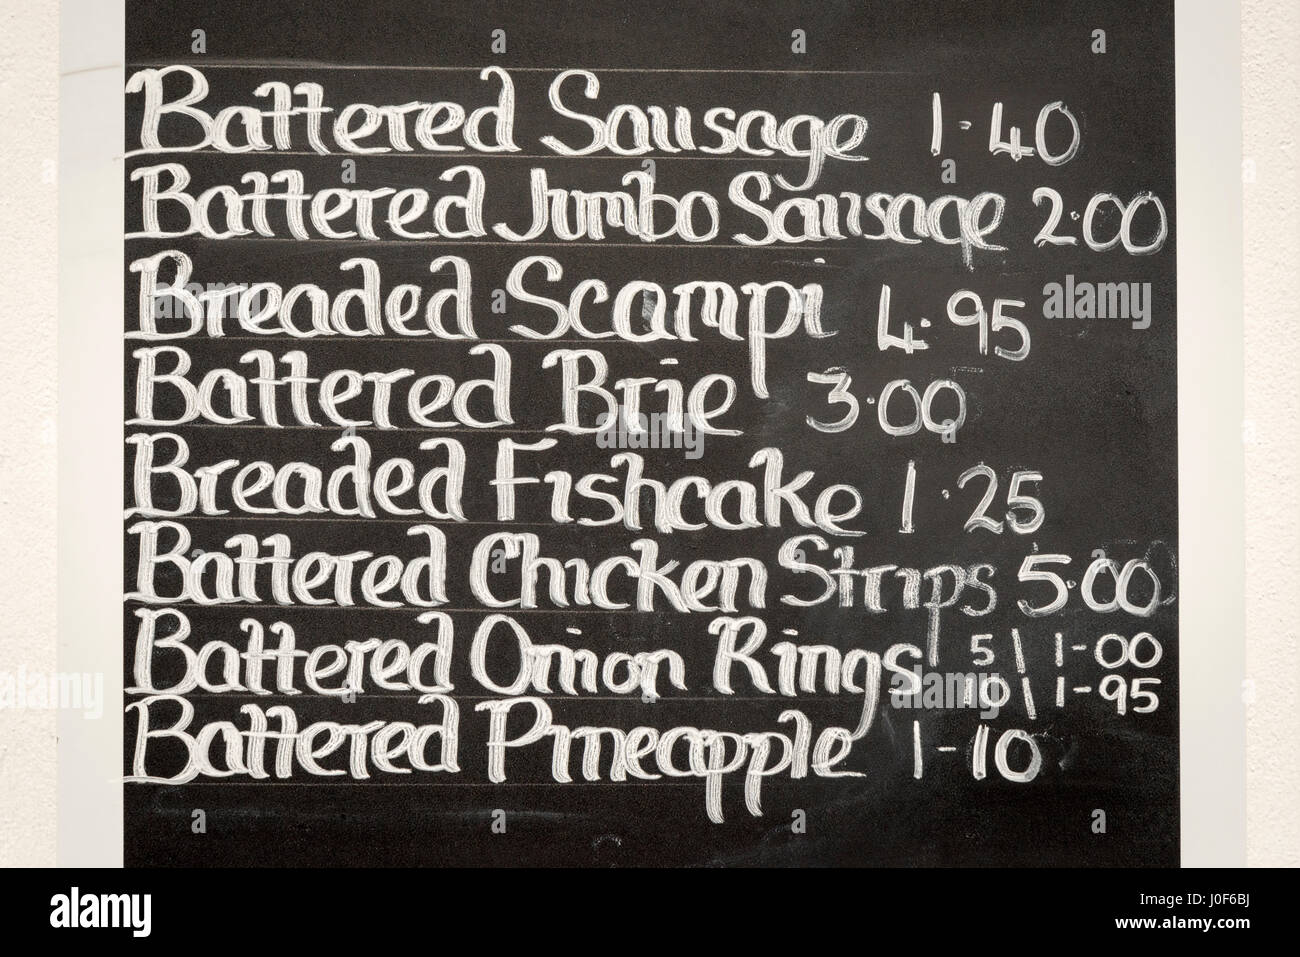 A fish and chip shop menu written in chalk on a blackboard Stock Photo